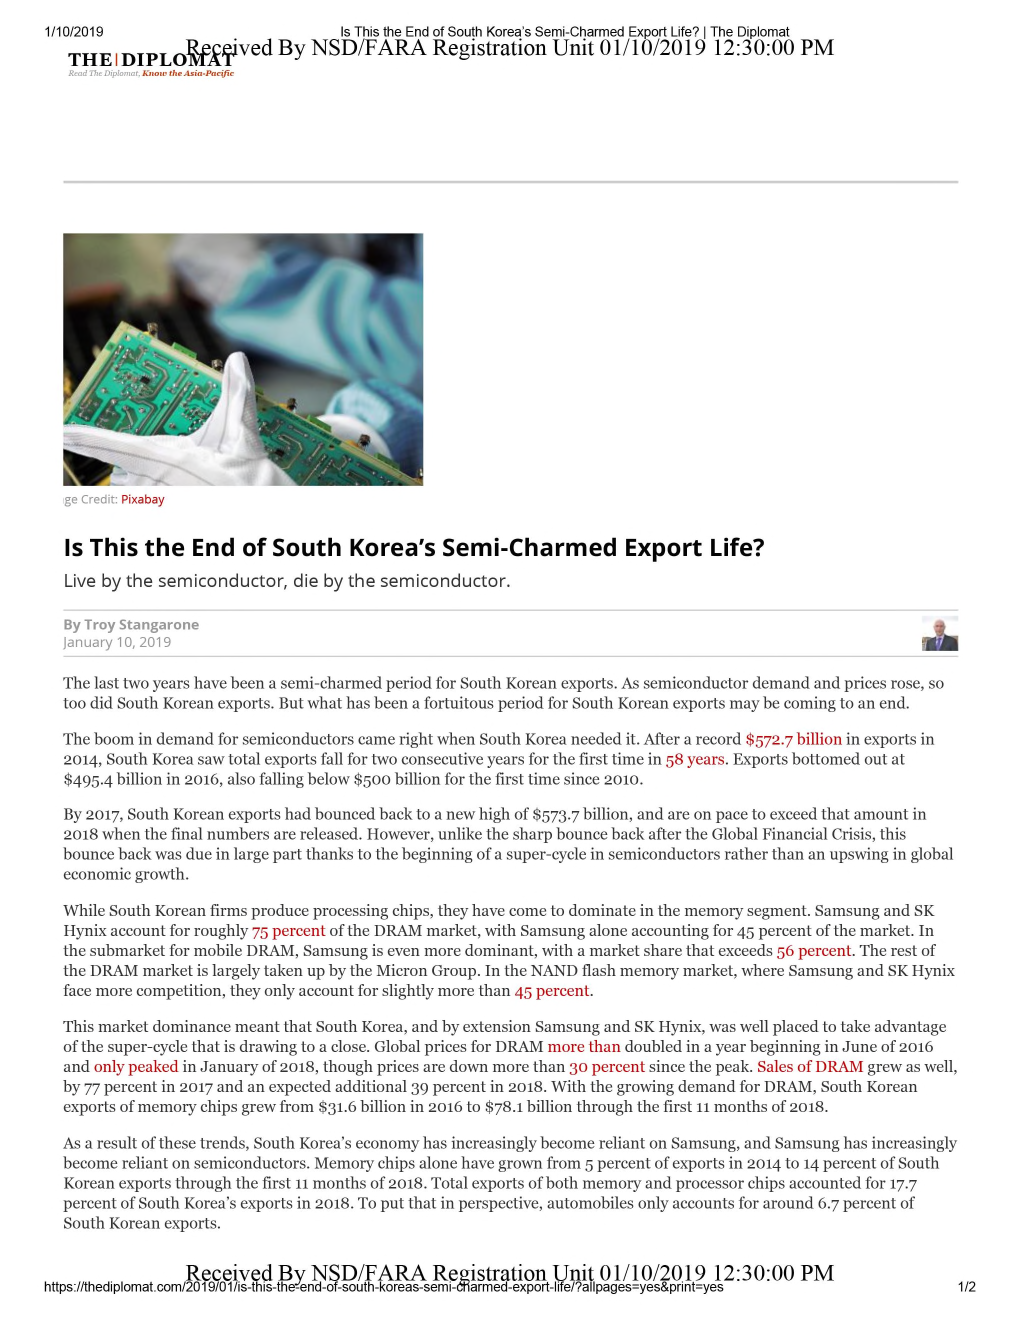 Is This the End of South Korea's Semi-Charmed Export Life? Live by the Semiconductor, Die by the Semiconductor